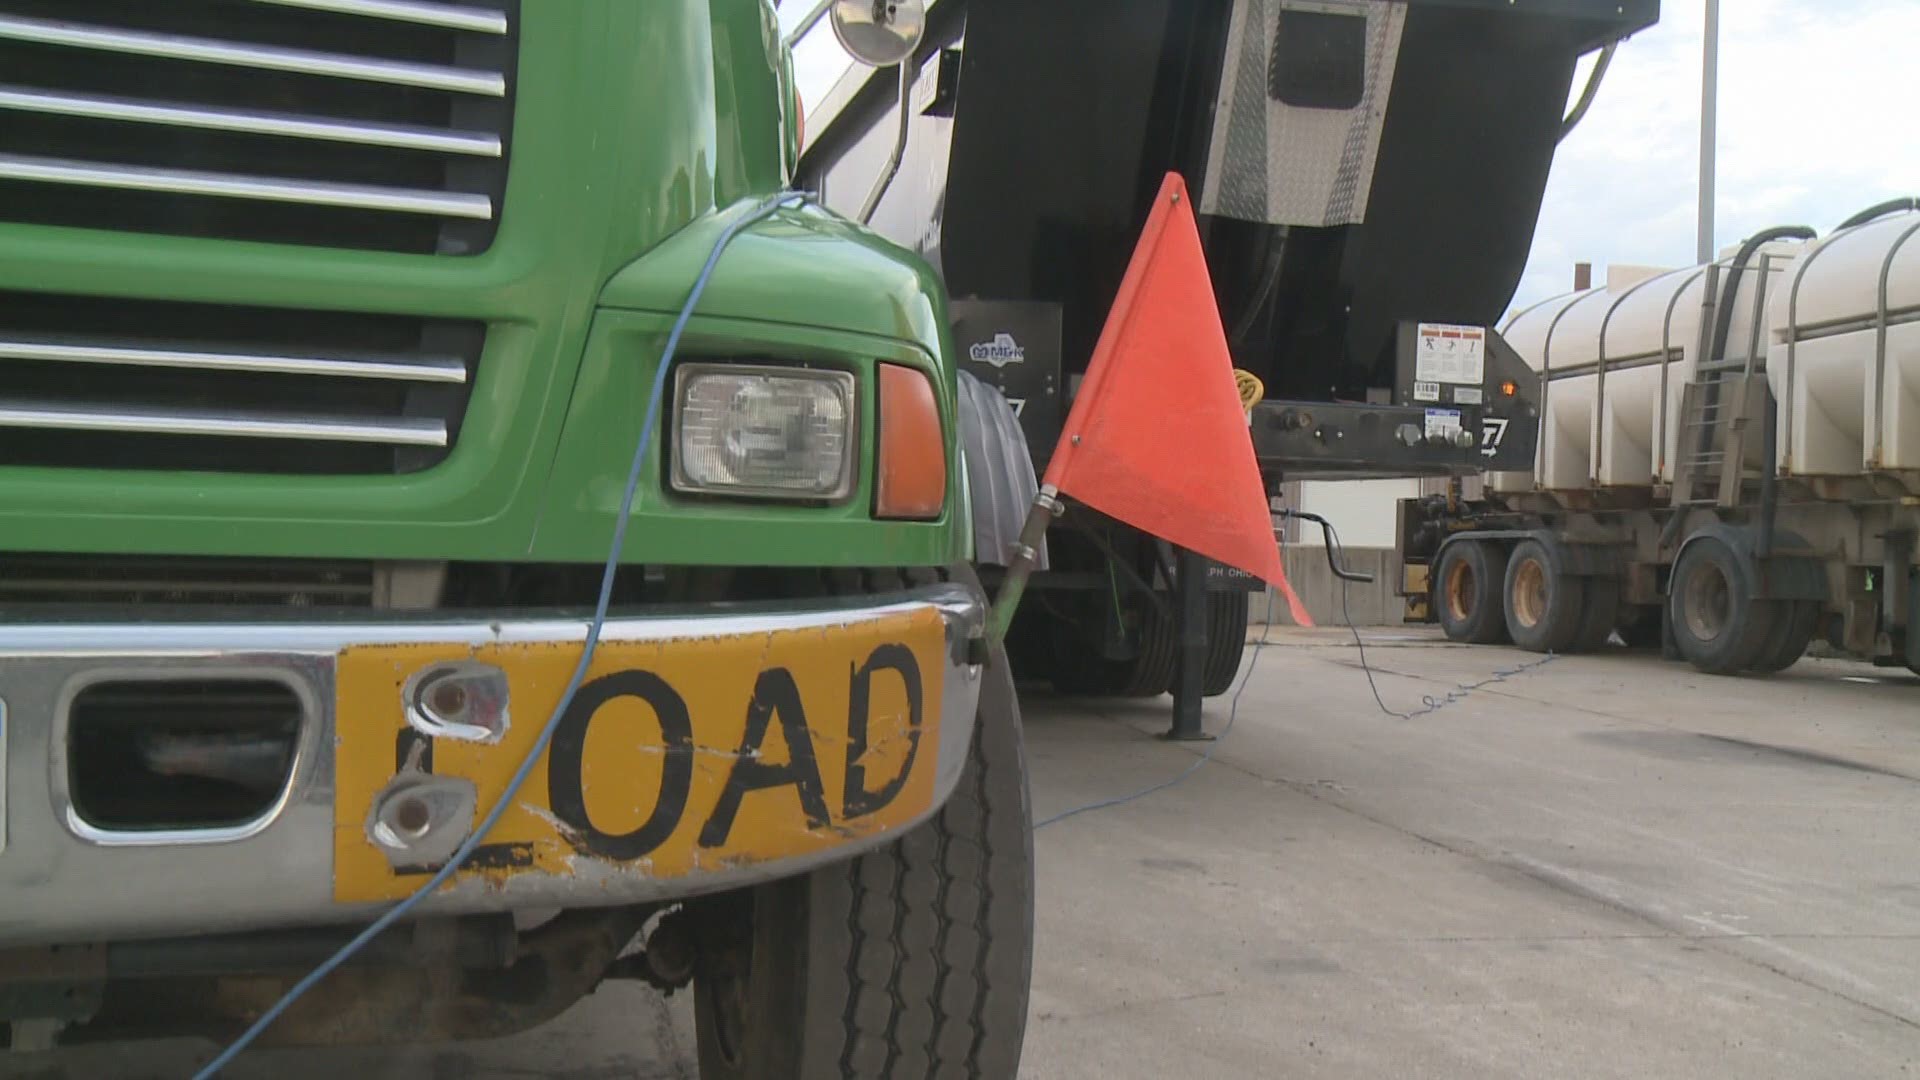 West Michigan hasn't seen much winter weather ahead of the holidays, but the threat of a potentially snowy mix headed our way has road crews at the ready.